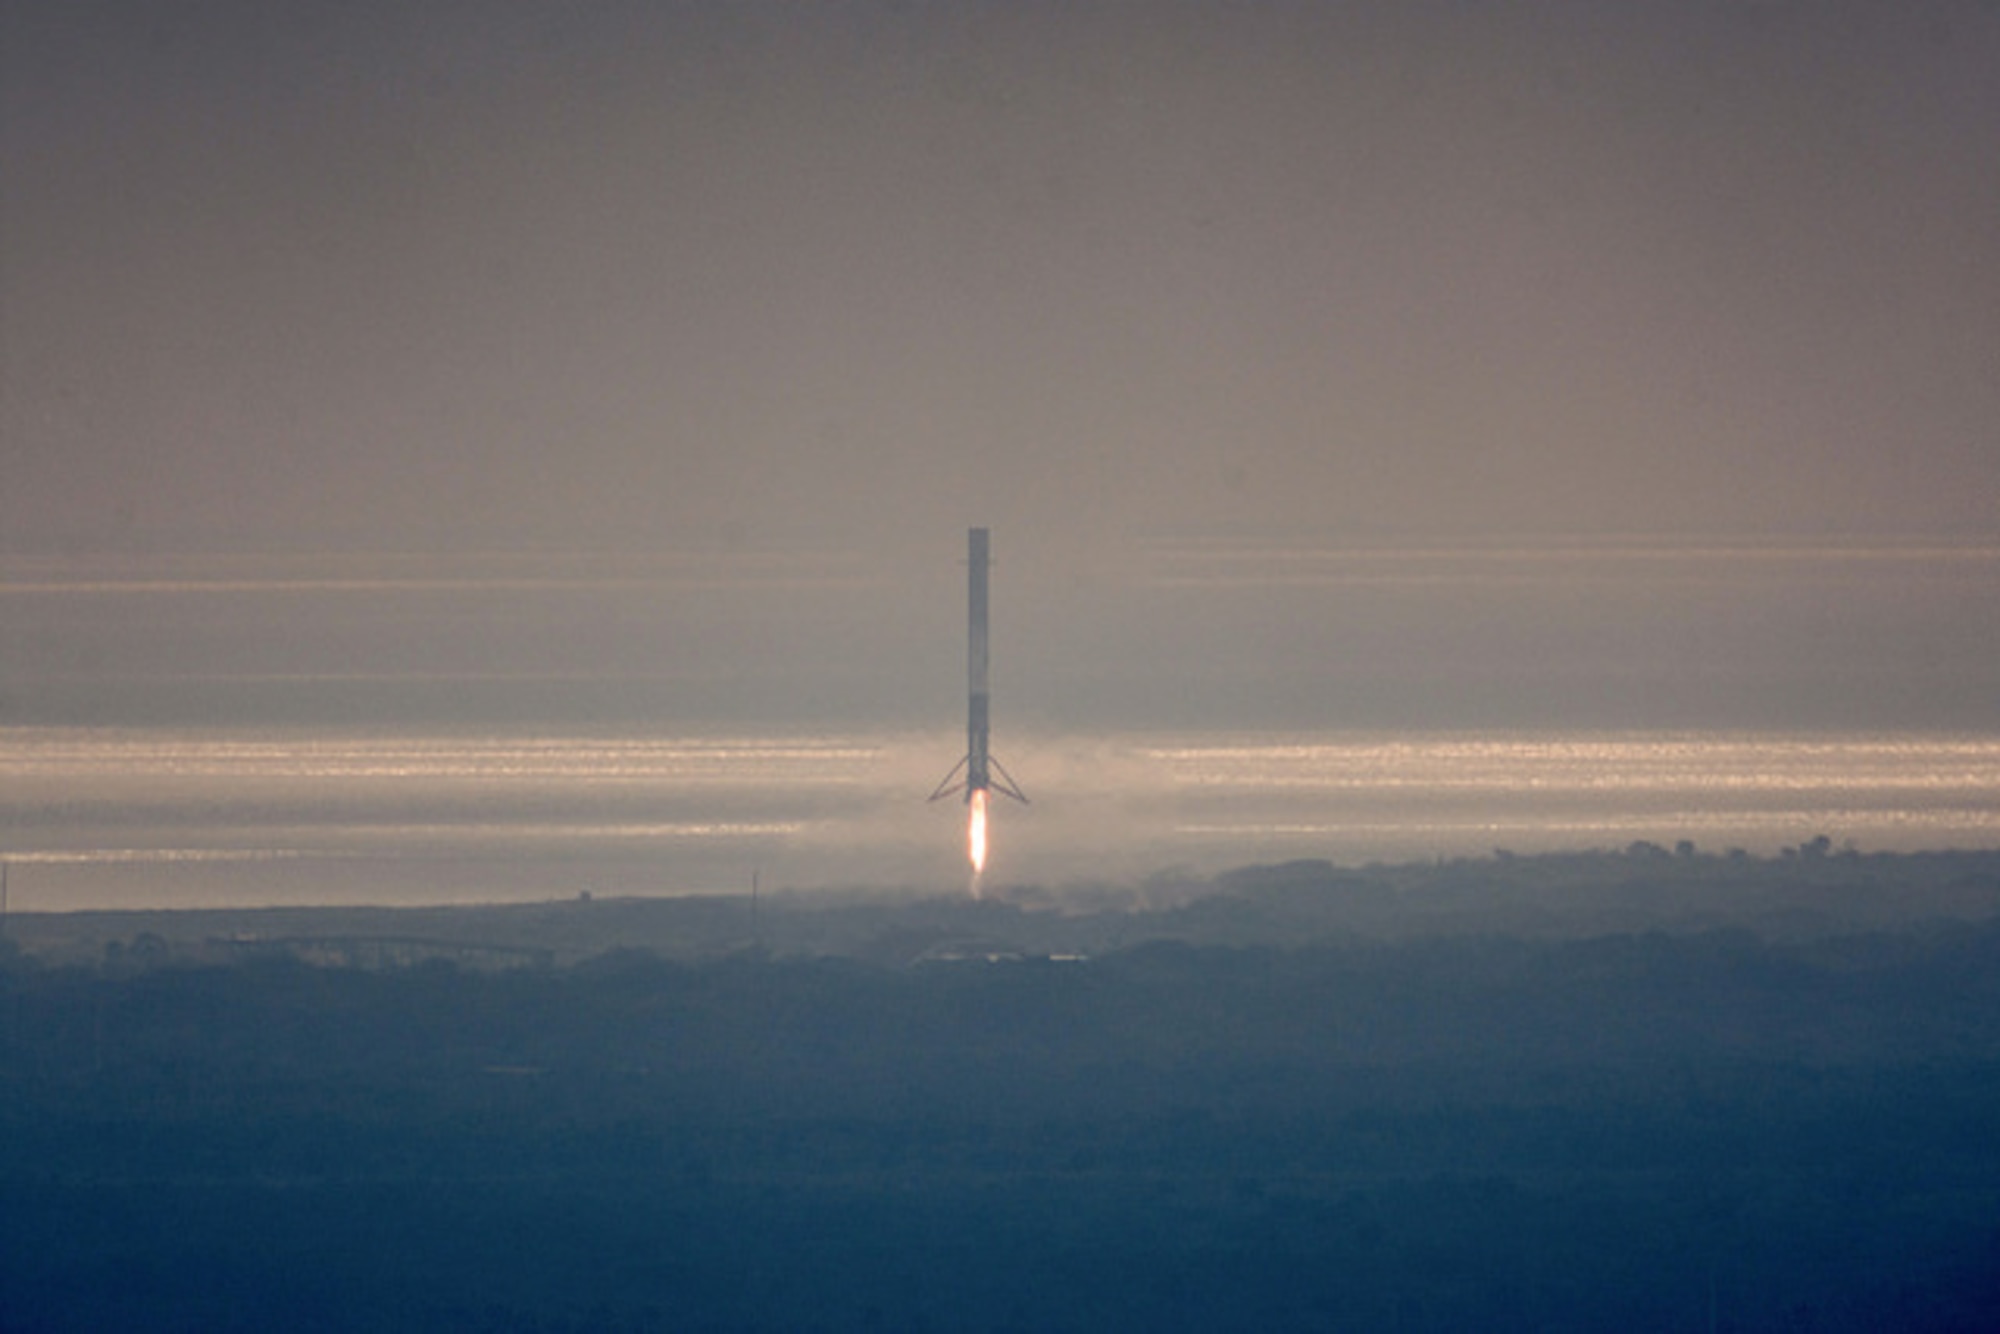 SpaceX Falcon 9's 1st stage booster on Space Launch Complex 13 after landing at Cape Canaveral Air Force Station Feb. 19, 2017. The booster landed minutes after the successful launch of the Falcon 9 carrying the 10th commercial resupply mission to the International Space Station. (Courtesy photo/SpaceX)